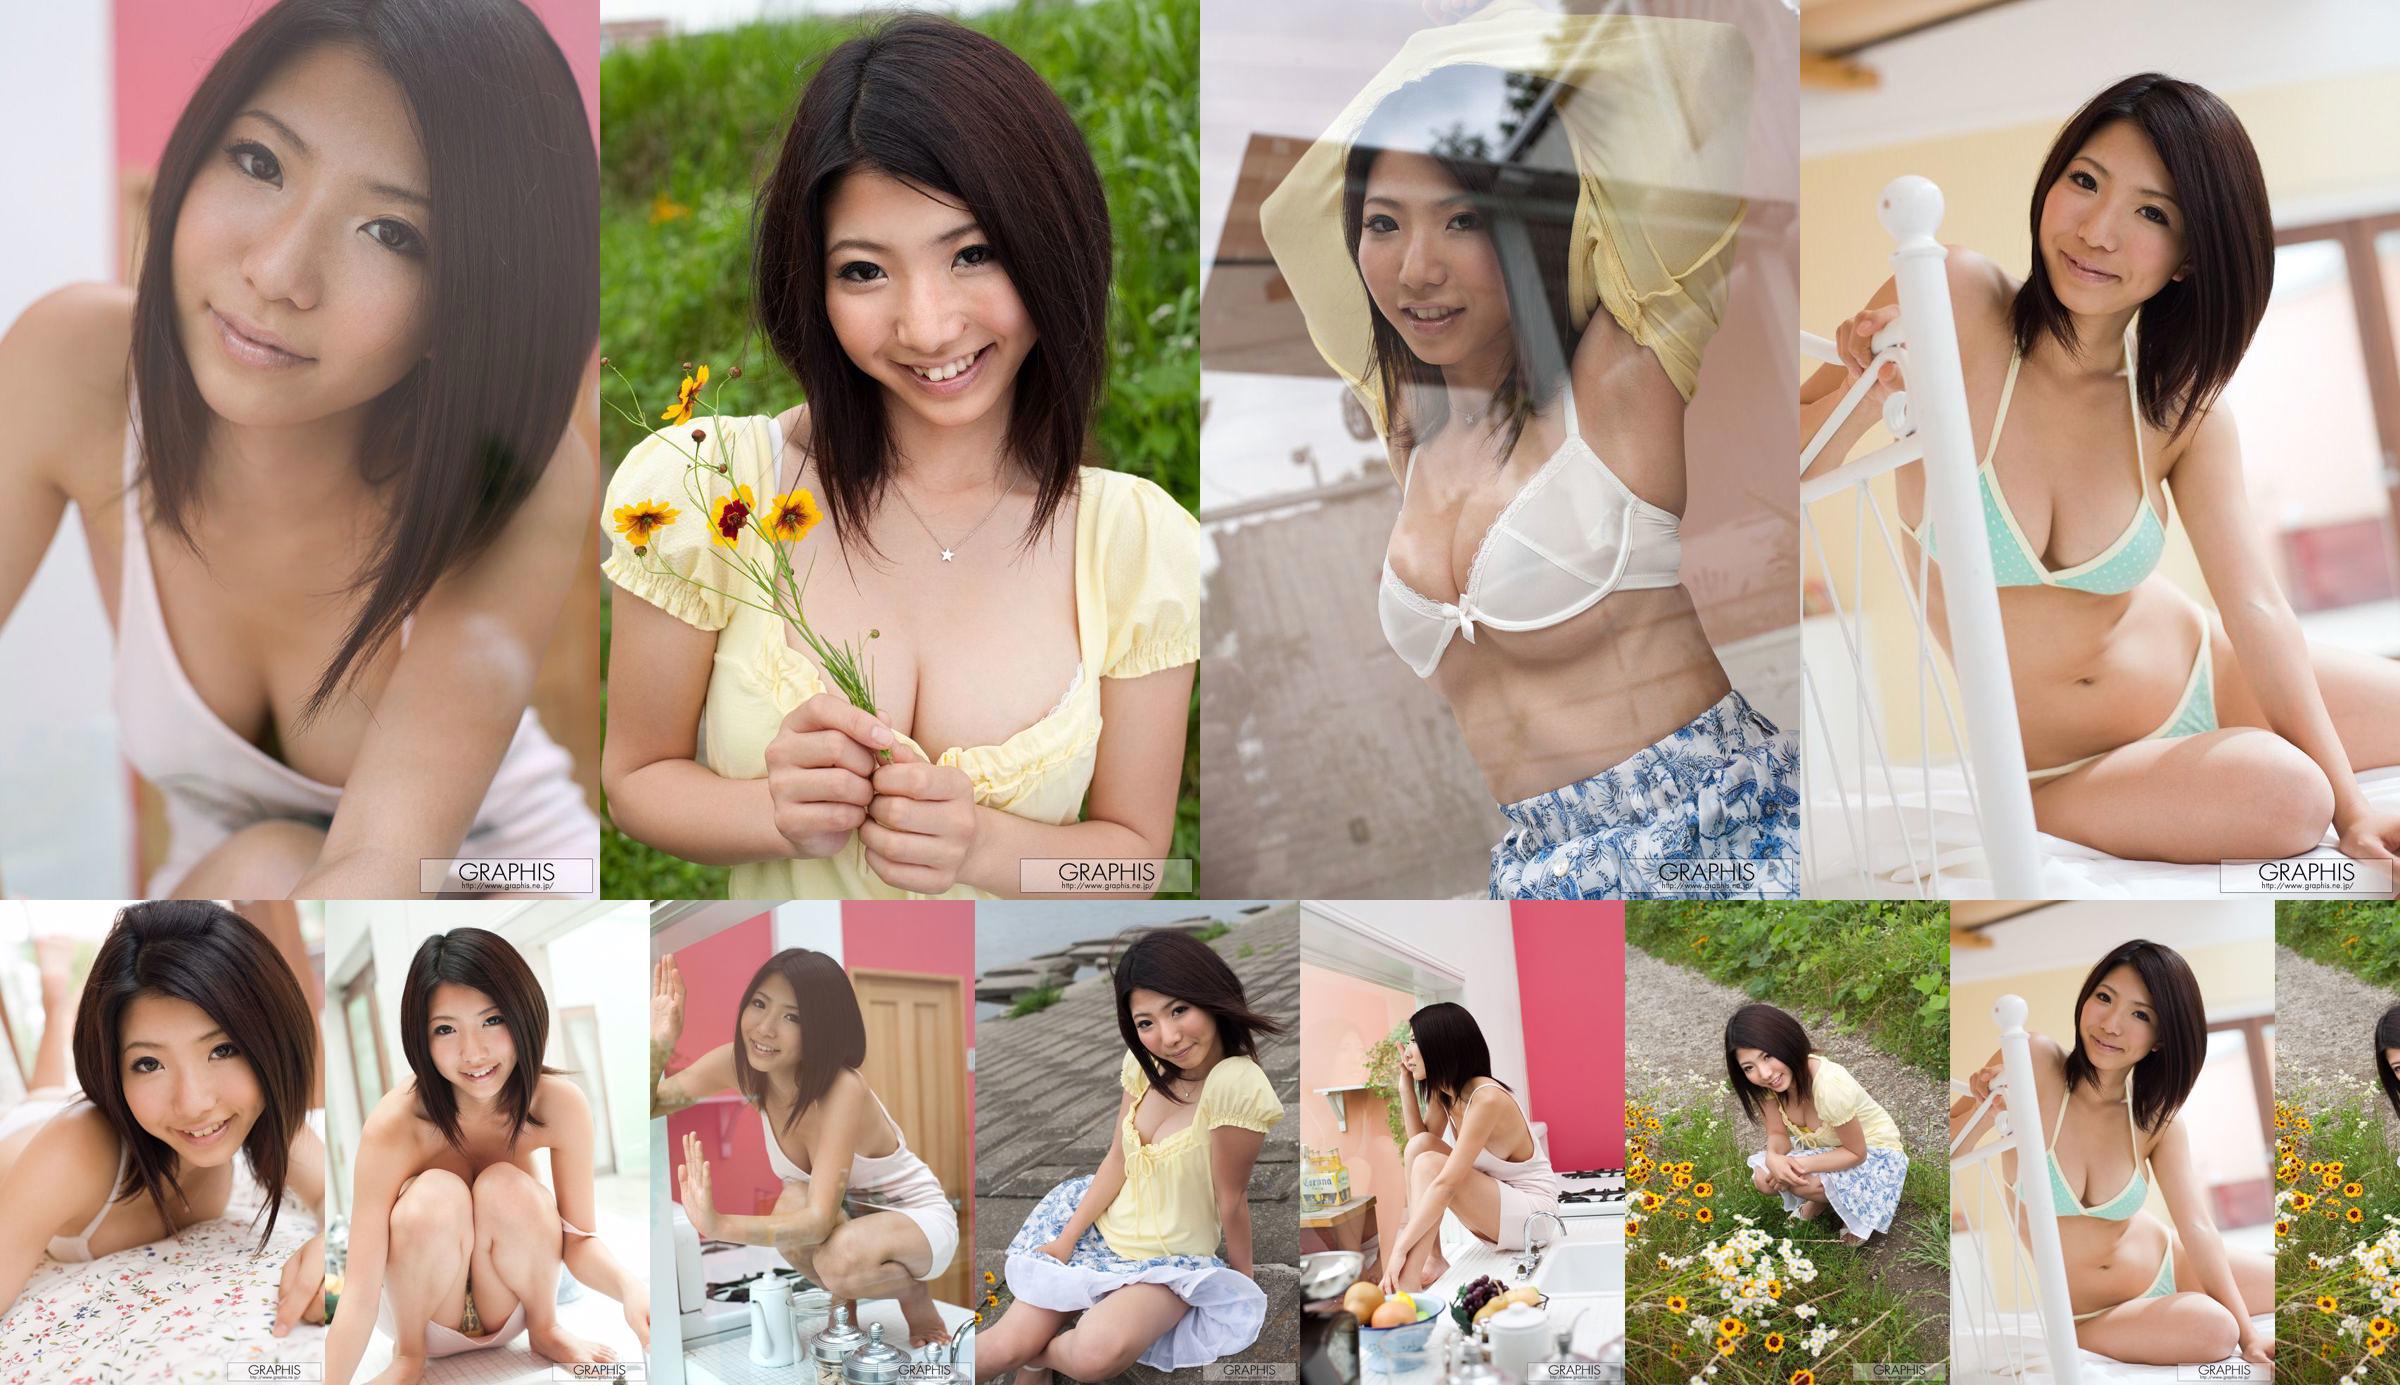 An Ann 《Simple and Innocent》 [Graphis] Gals No.30459a Page 4